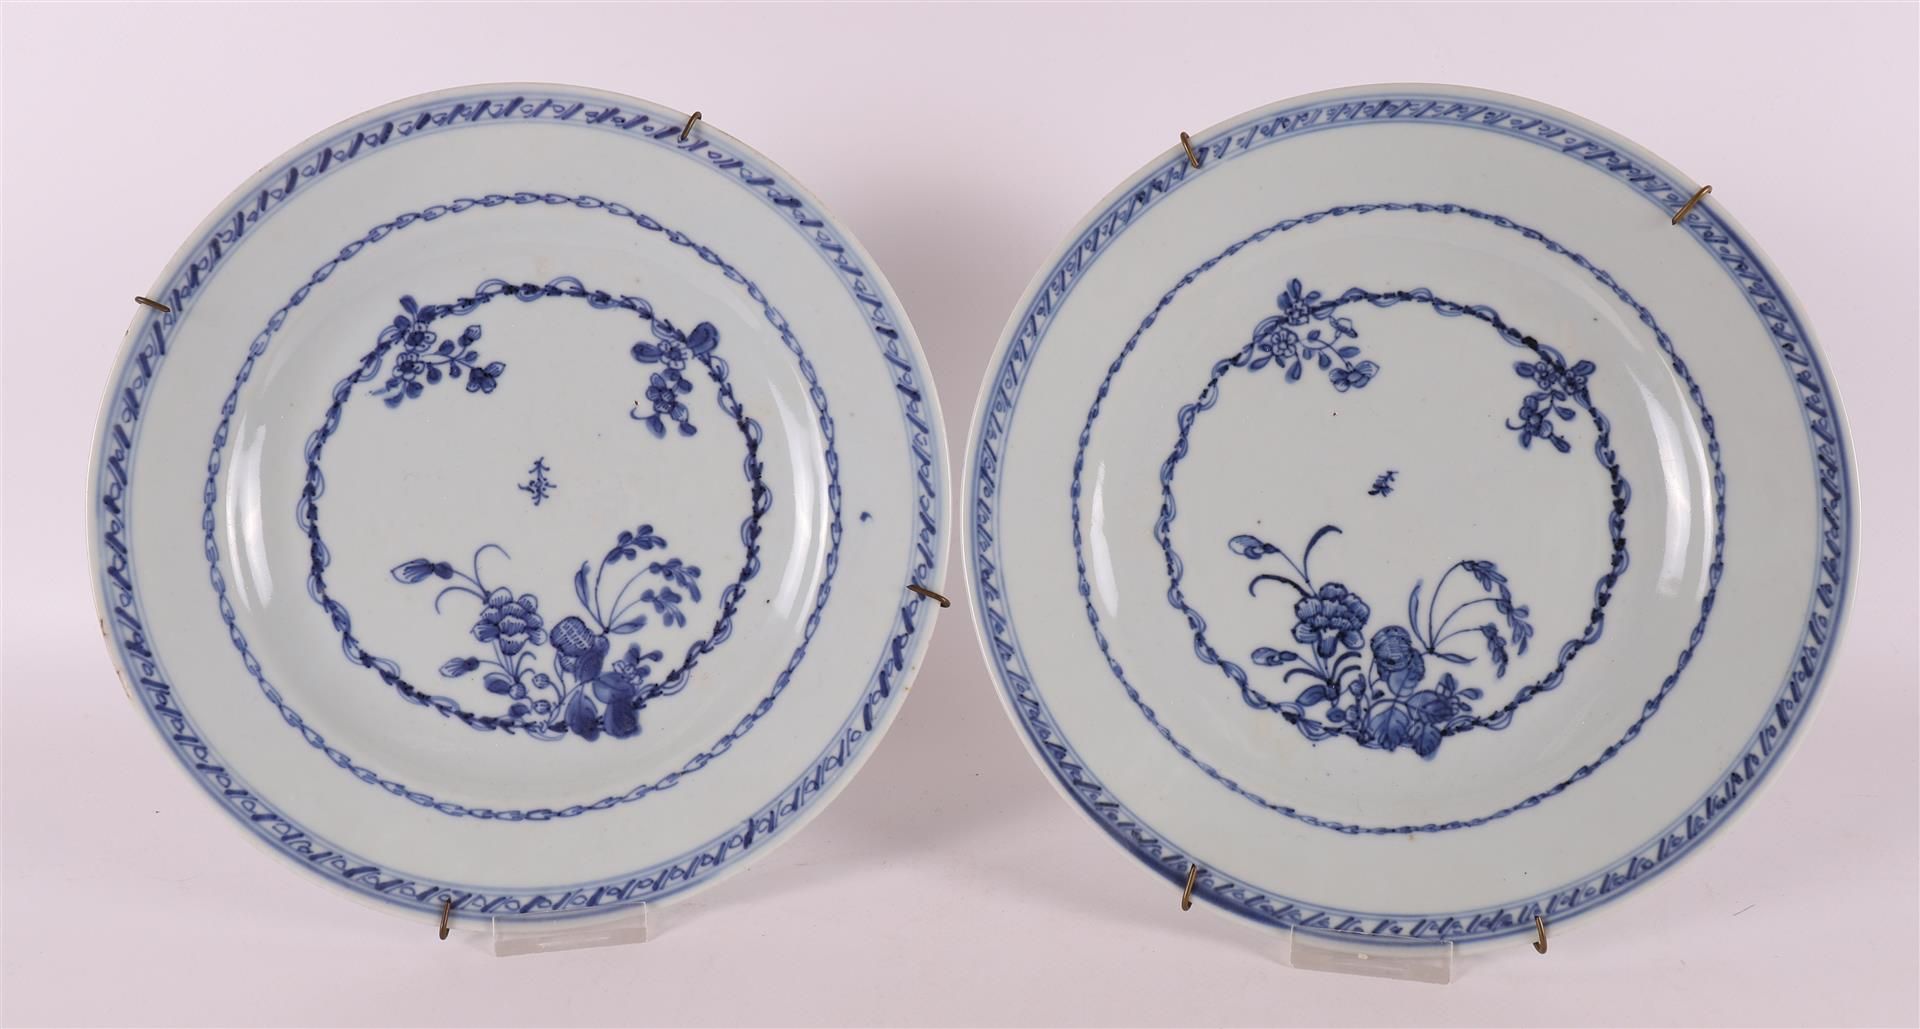 A set of blue and white porcelain plates, China, Qianlong 18th century.